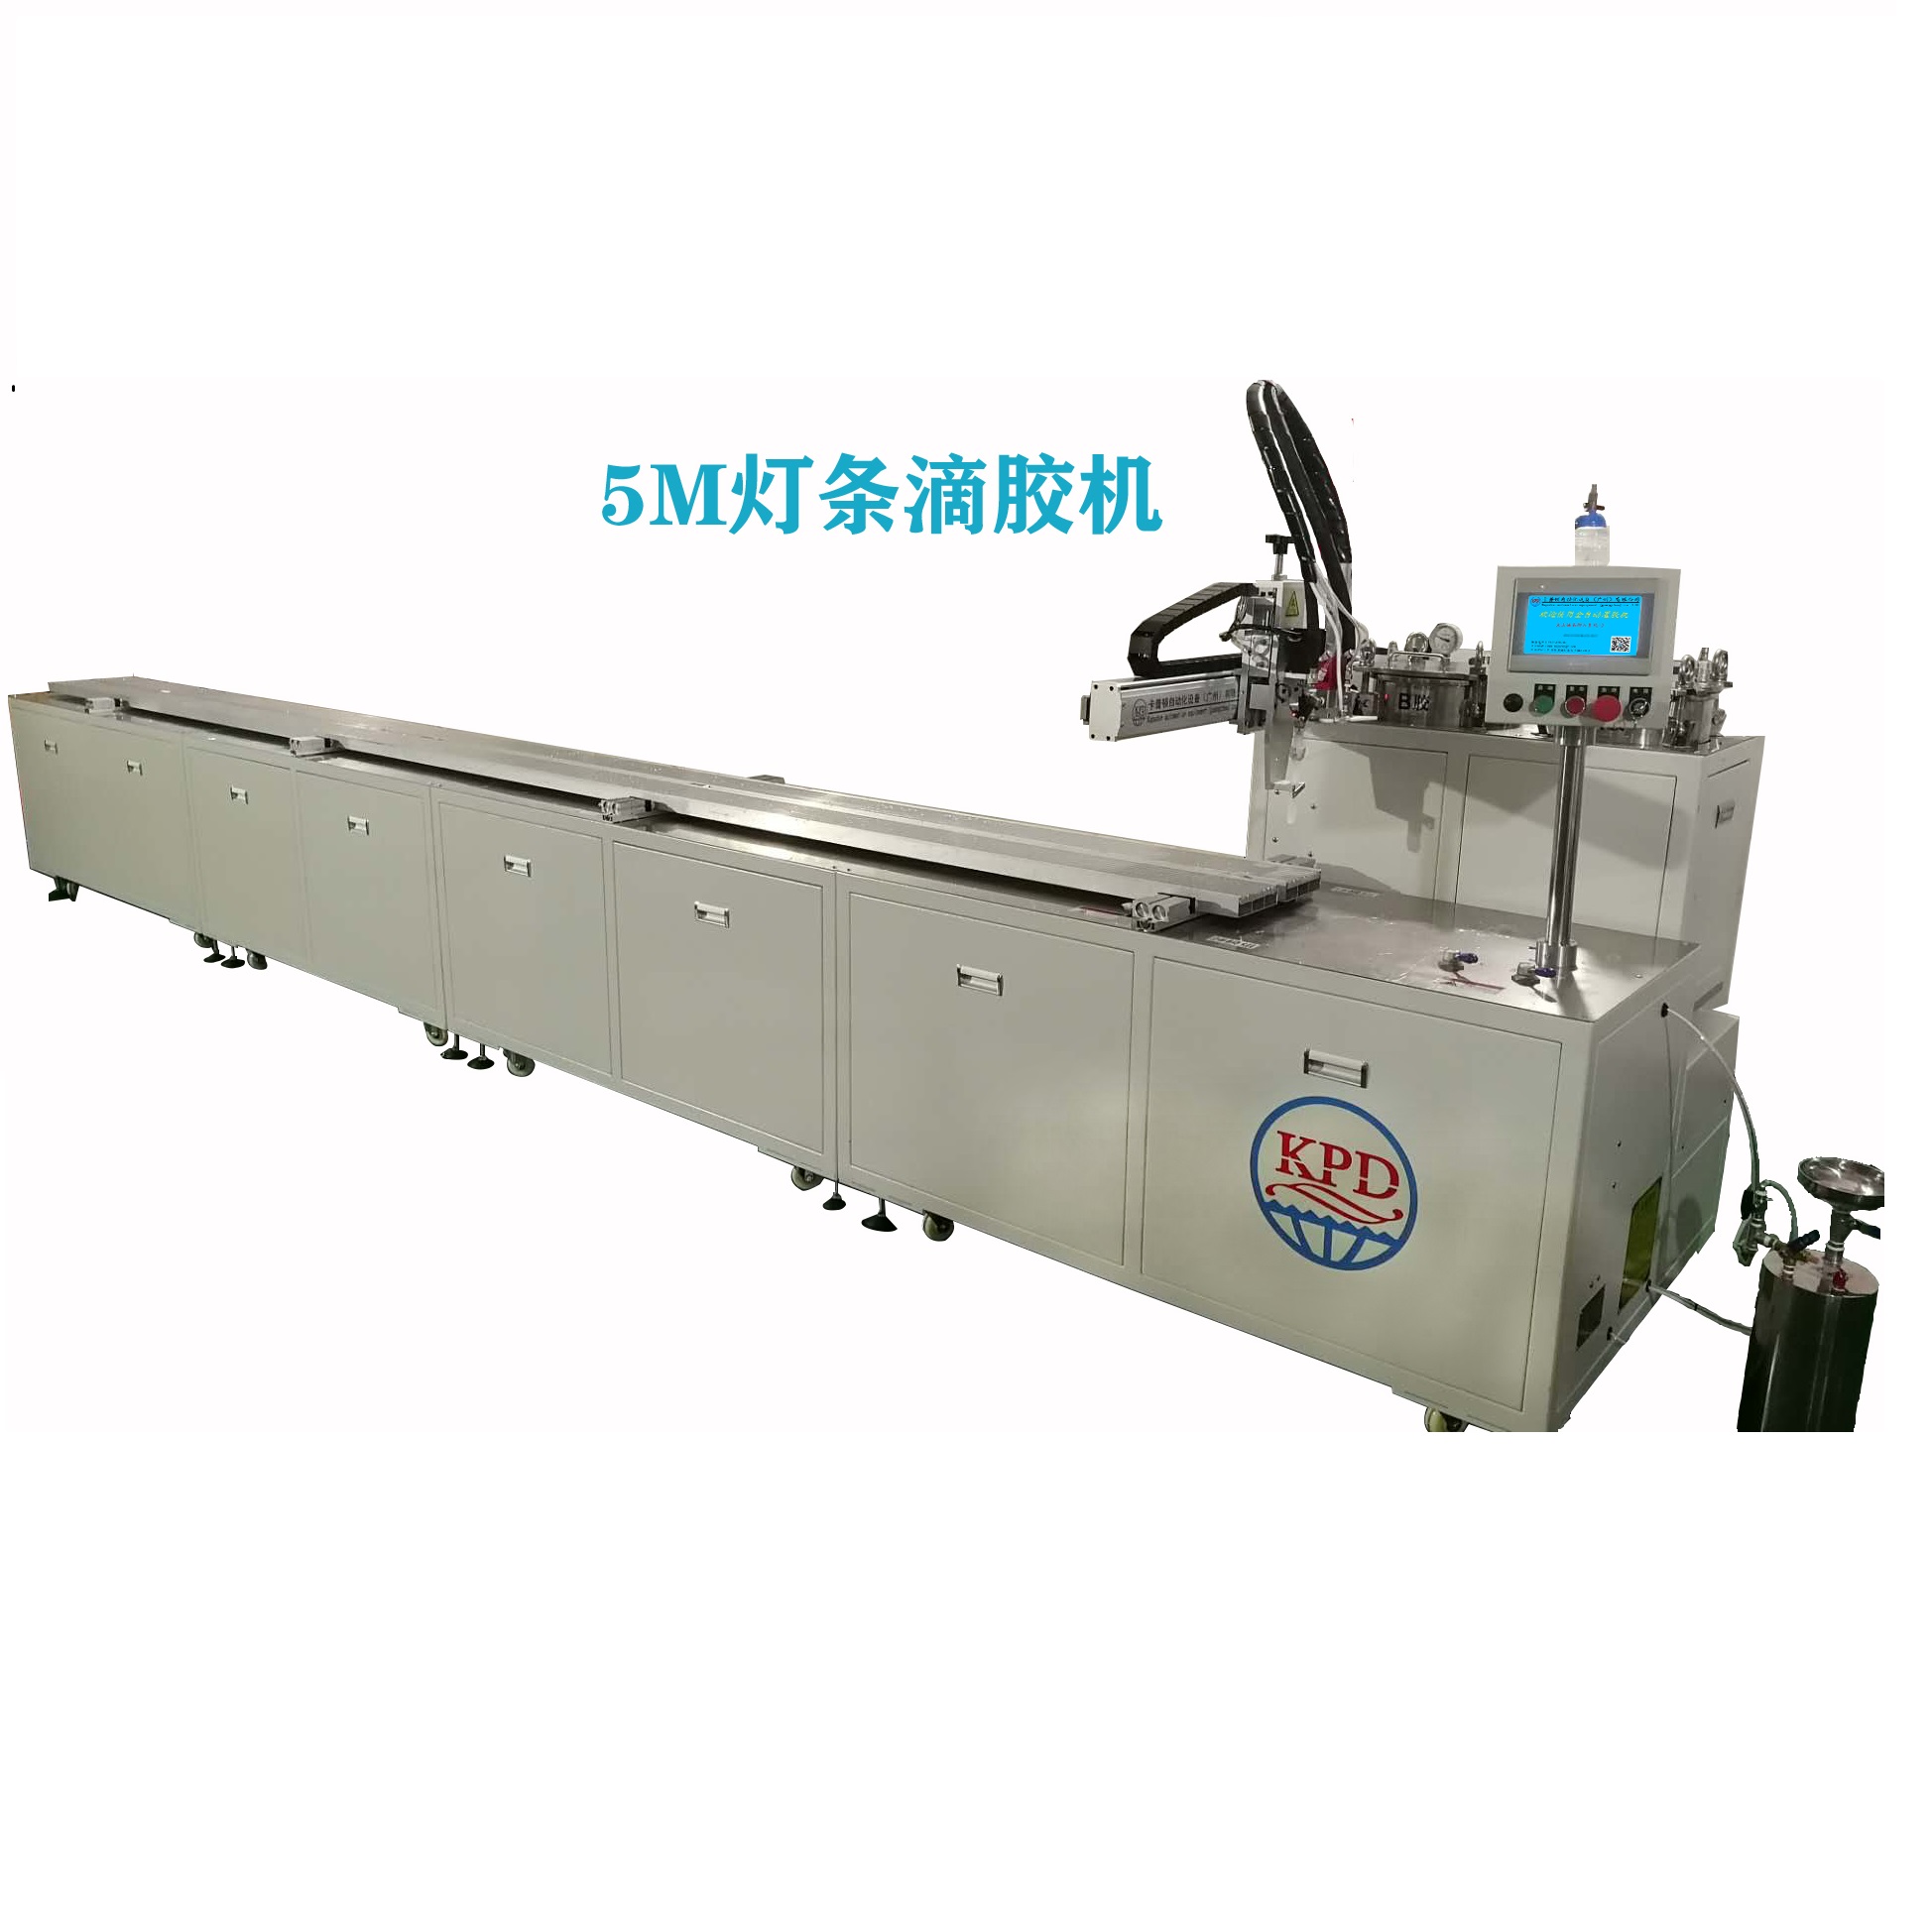 CE Certificated Polyurethane Glue Dispenser Two-Parts Material Automatic Mixing and Potting Machine for LED Lighting and PCBA